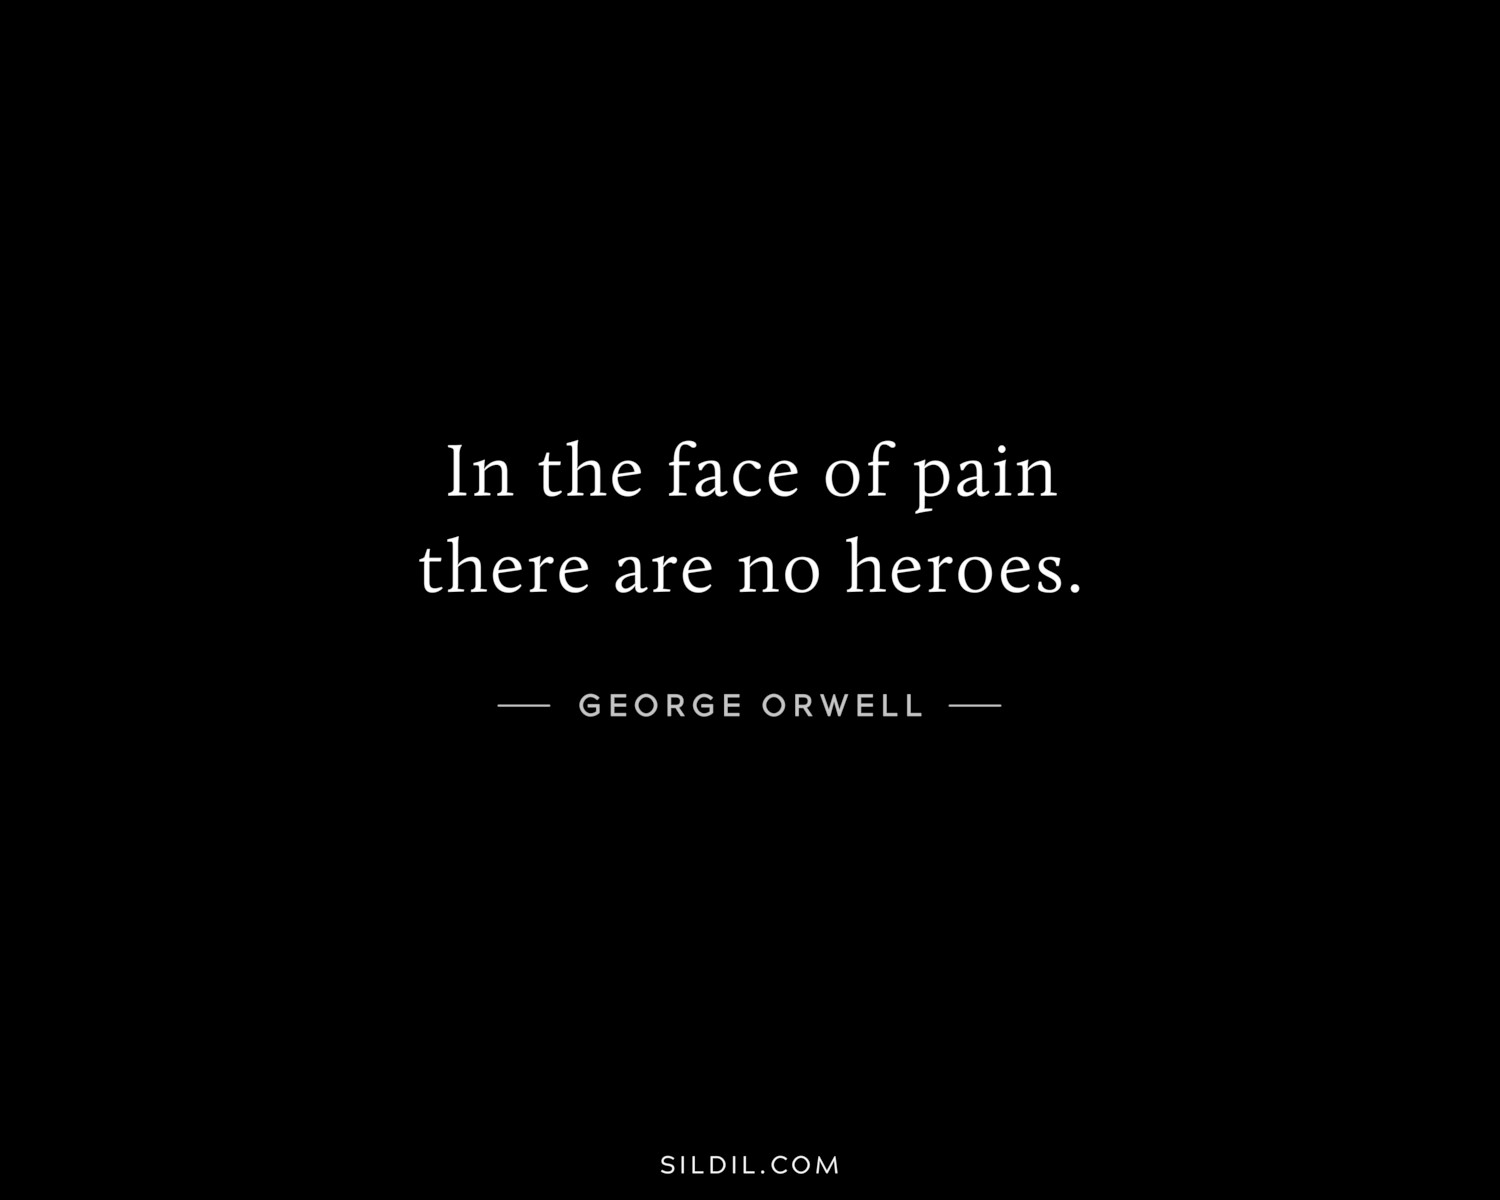 In the face of pain there are no heroes.